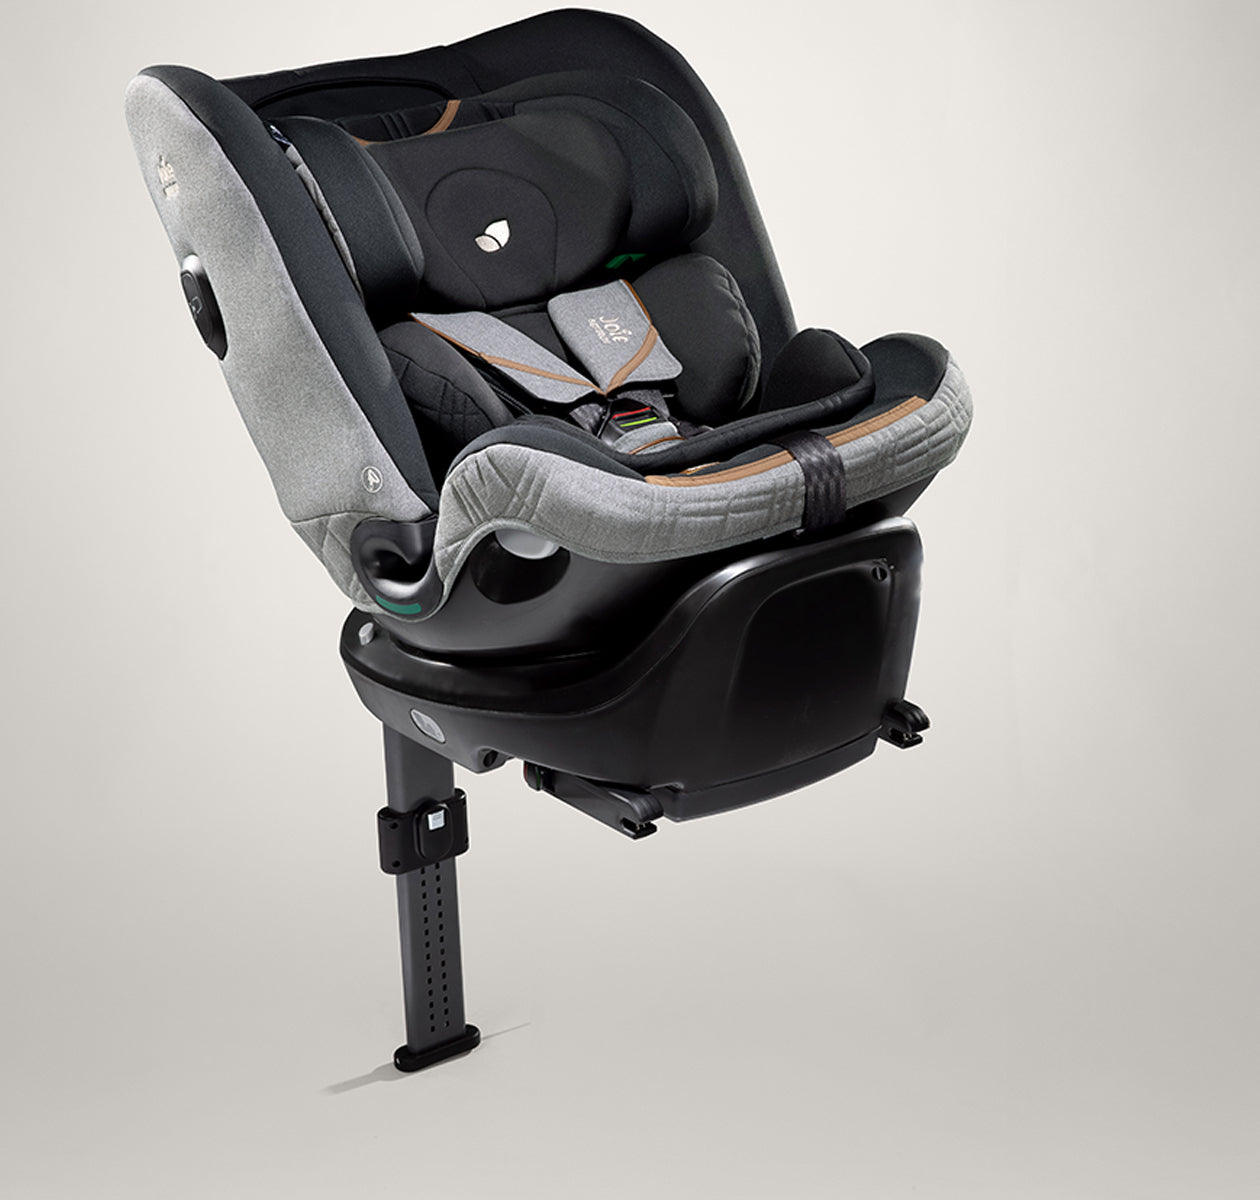 Joie i-Spin XL SIGNATURE - 0+/1/2/3 Car Seat - Carbon -  | For Your Little One